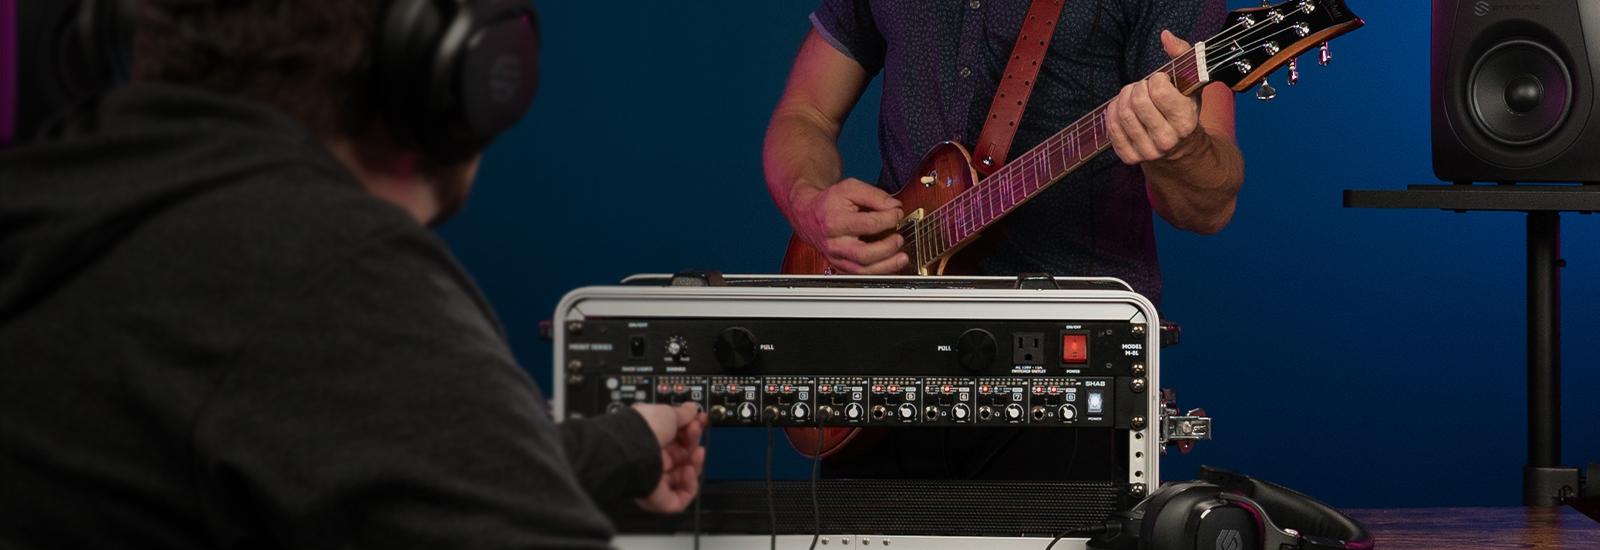 Sterling SHA8 8-channel rackmount headphone amplifier being setup in a studio with guitar player.